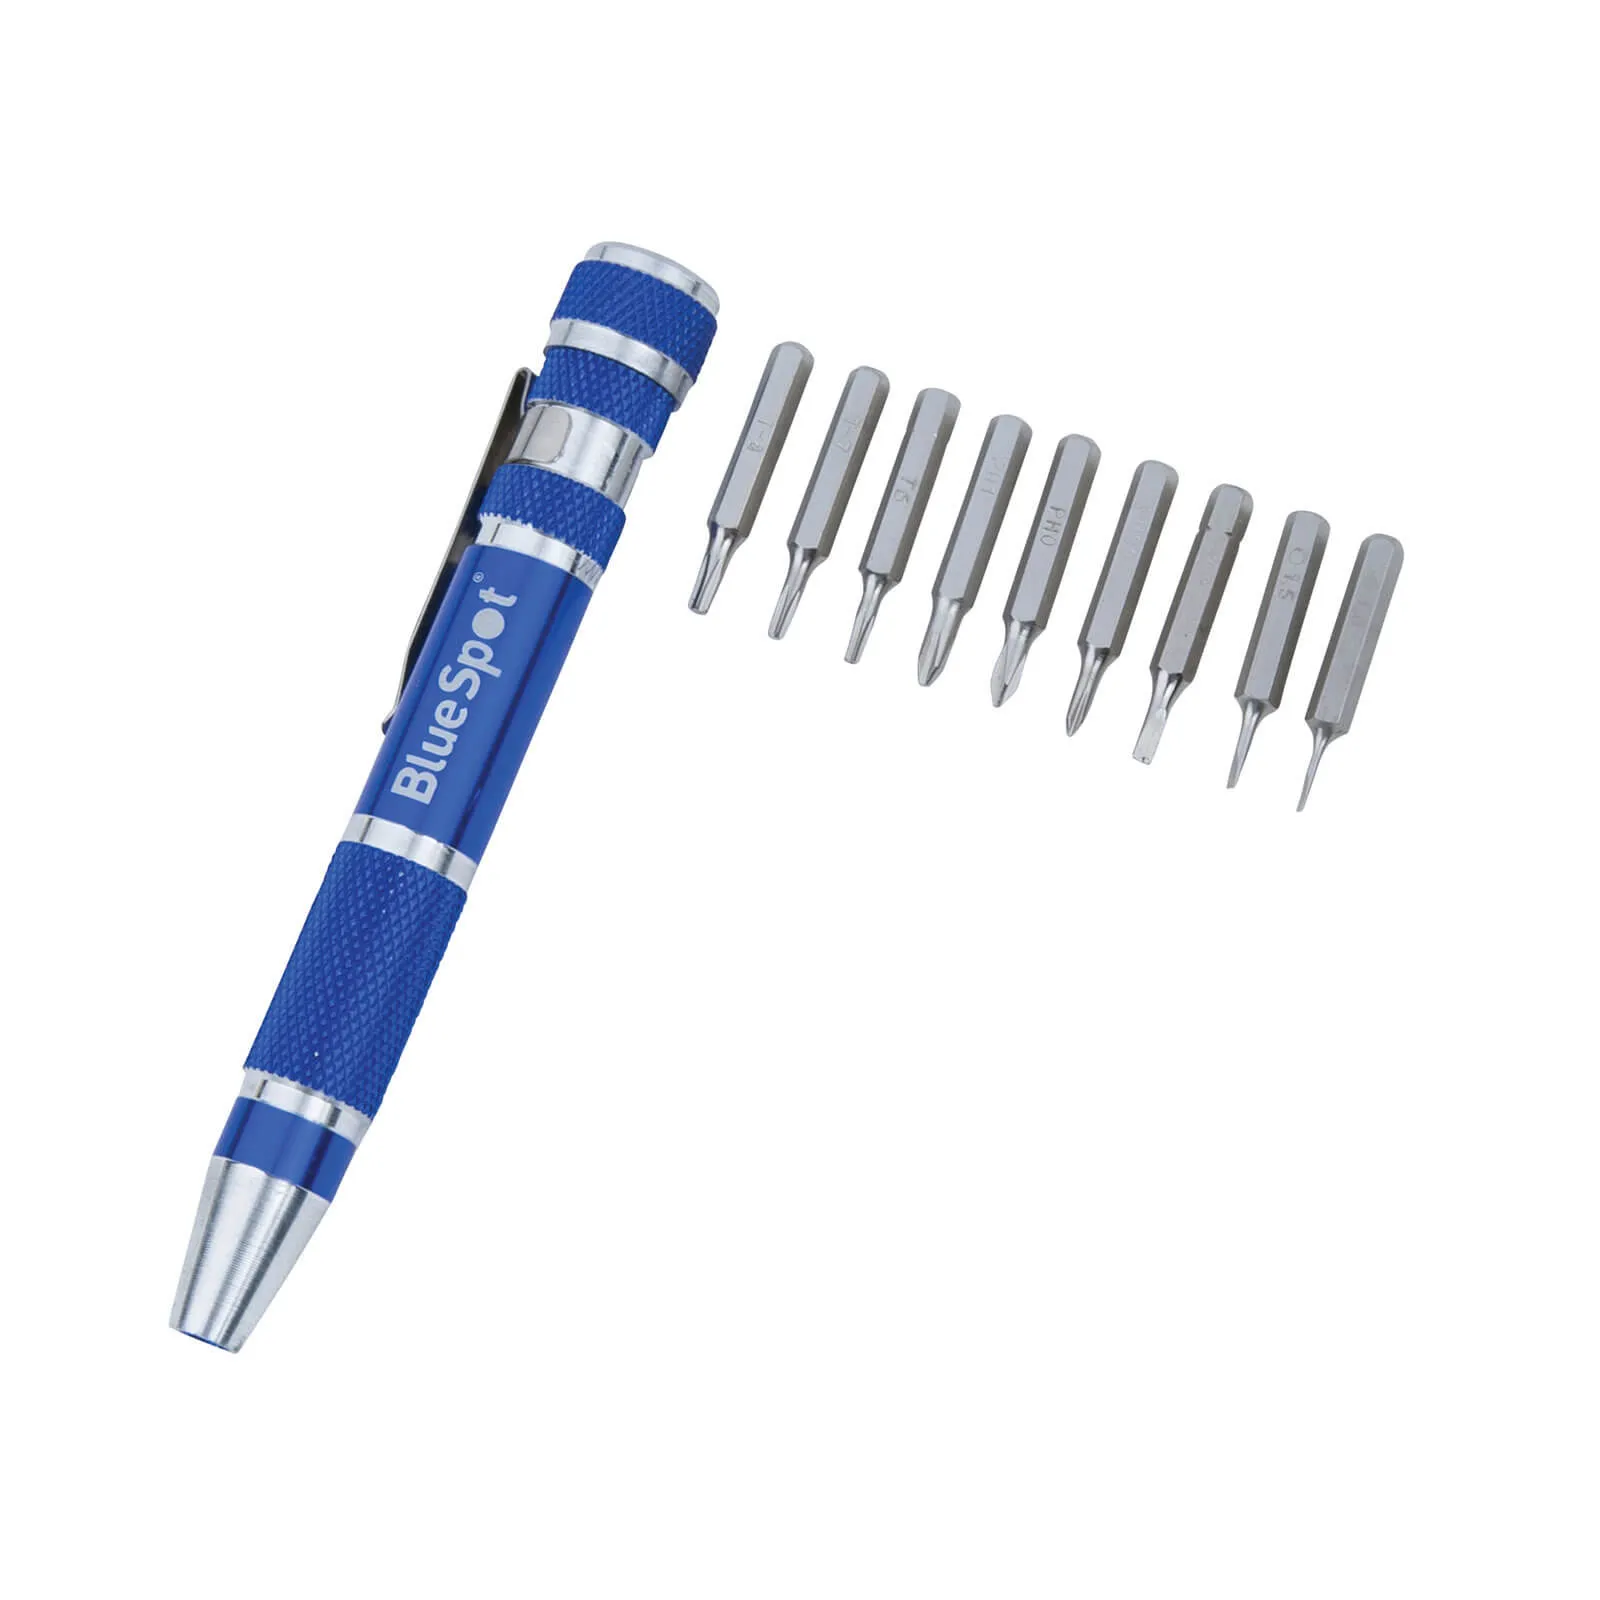 Blue Spot Precision 9 in 1 Slotted, Phillips and Torx Screwdriver